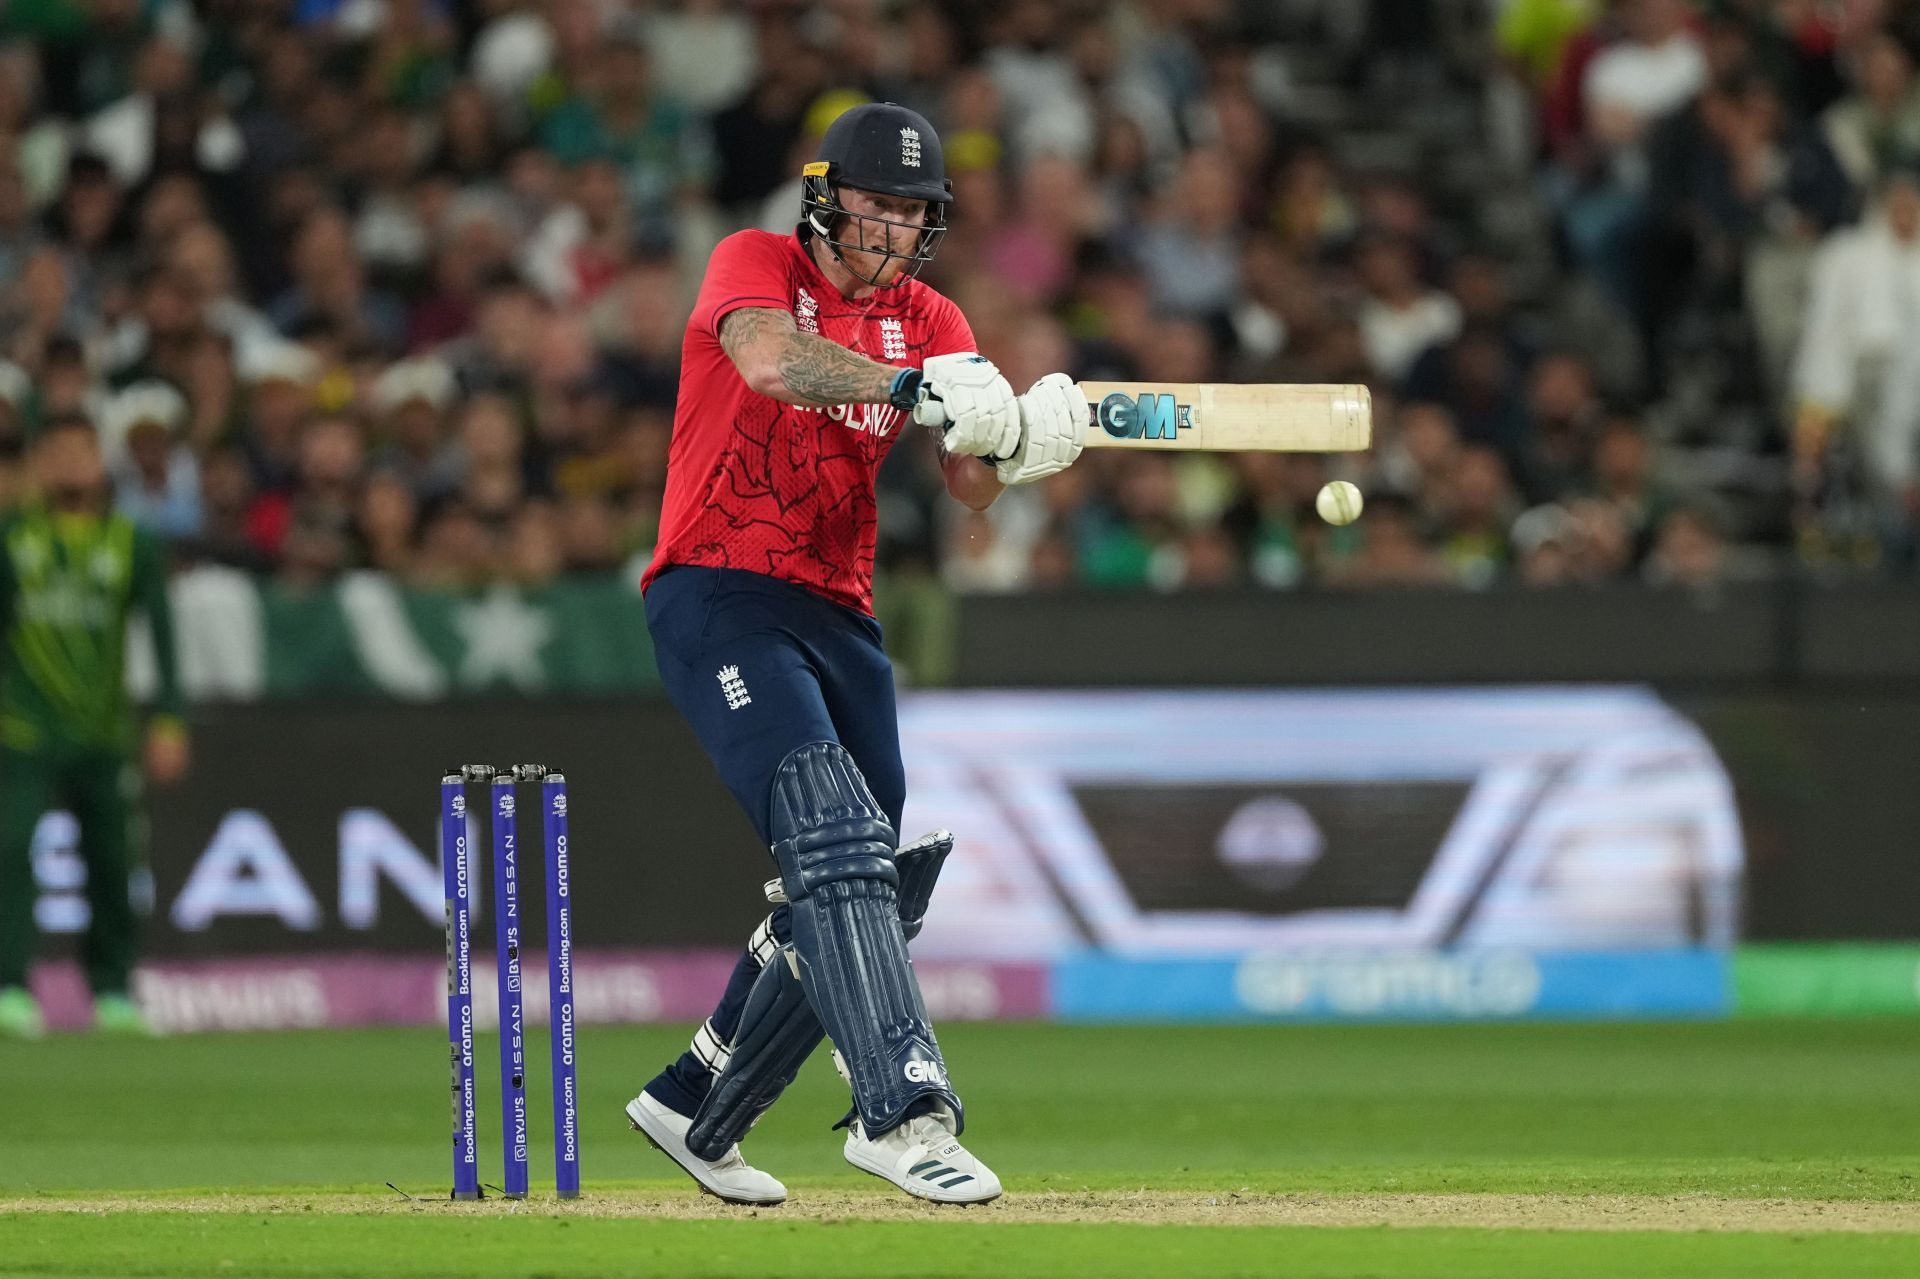 Ben Stokes struck five boundaries and a six during his innings.